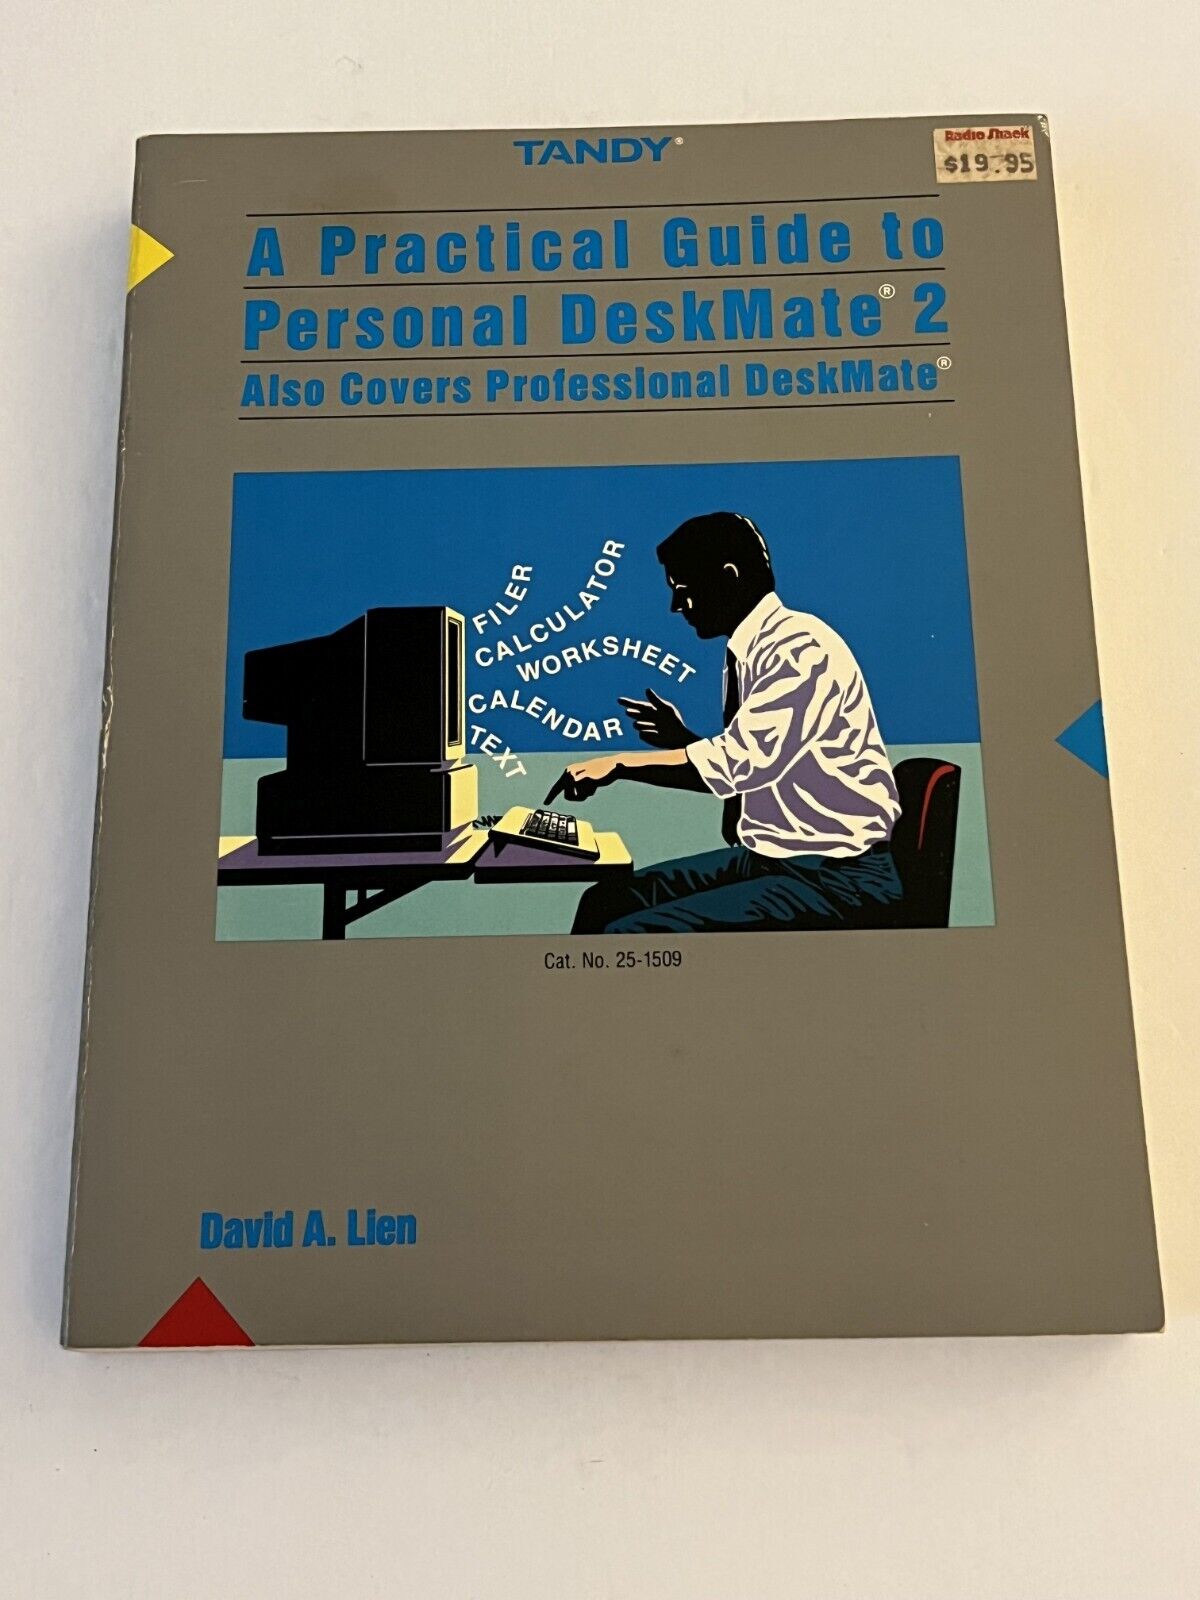 Vintage Tandy Practical Guide to Personal DeskMate2  25-1509 David A. Lien